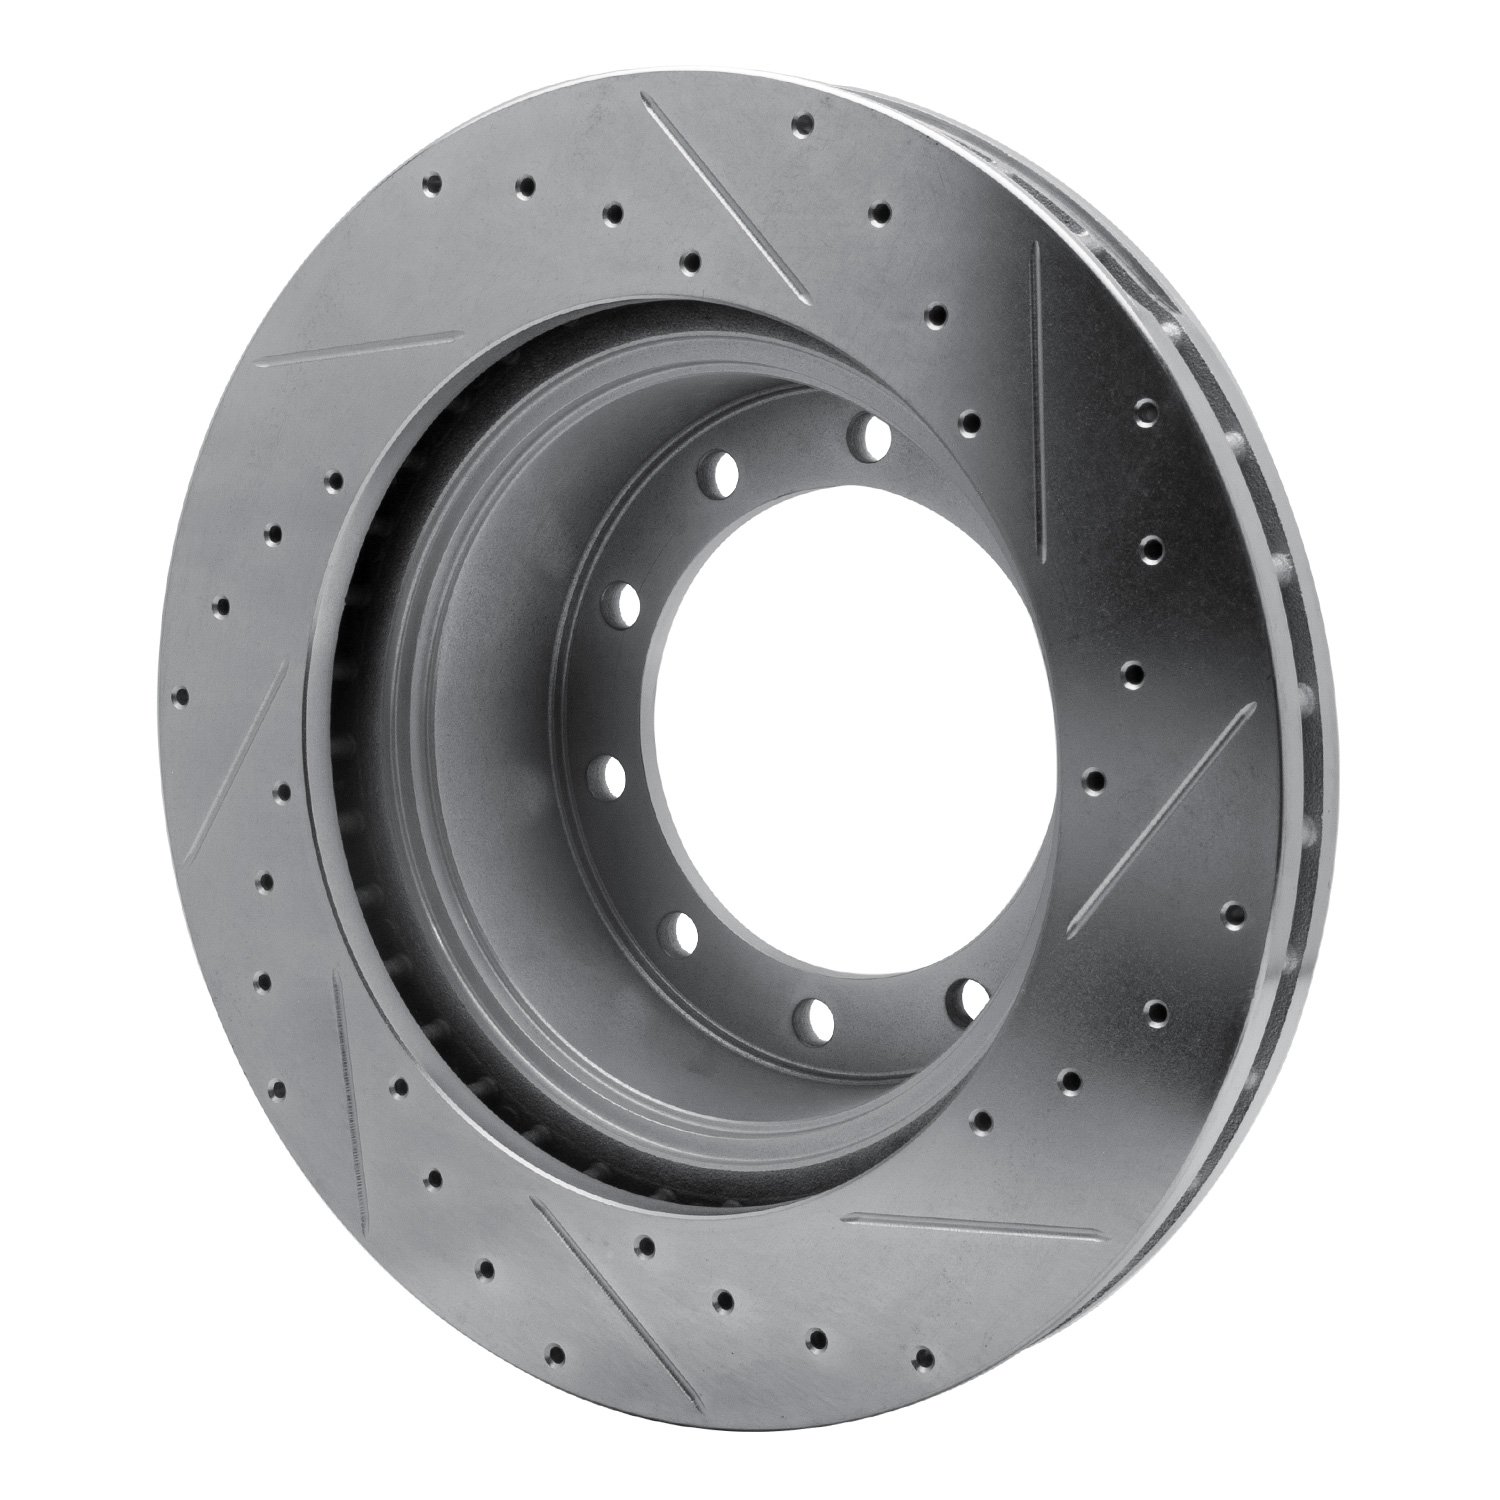 E-Line Drilled & Slotted Silver Brake Rotor, Fits Select Fits Multiple Makes/Models, Position: Front & Rear Left